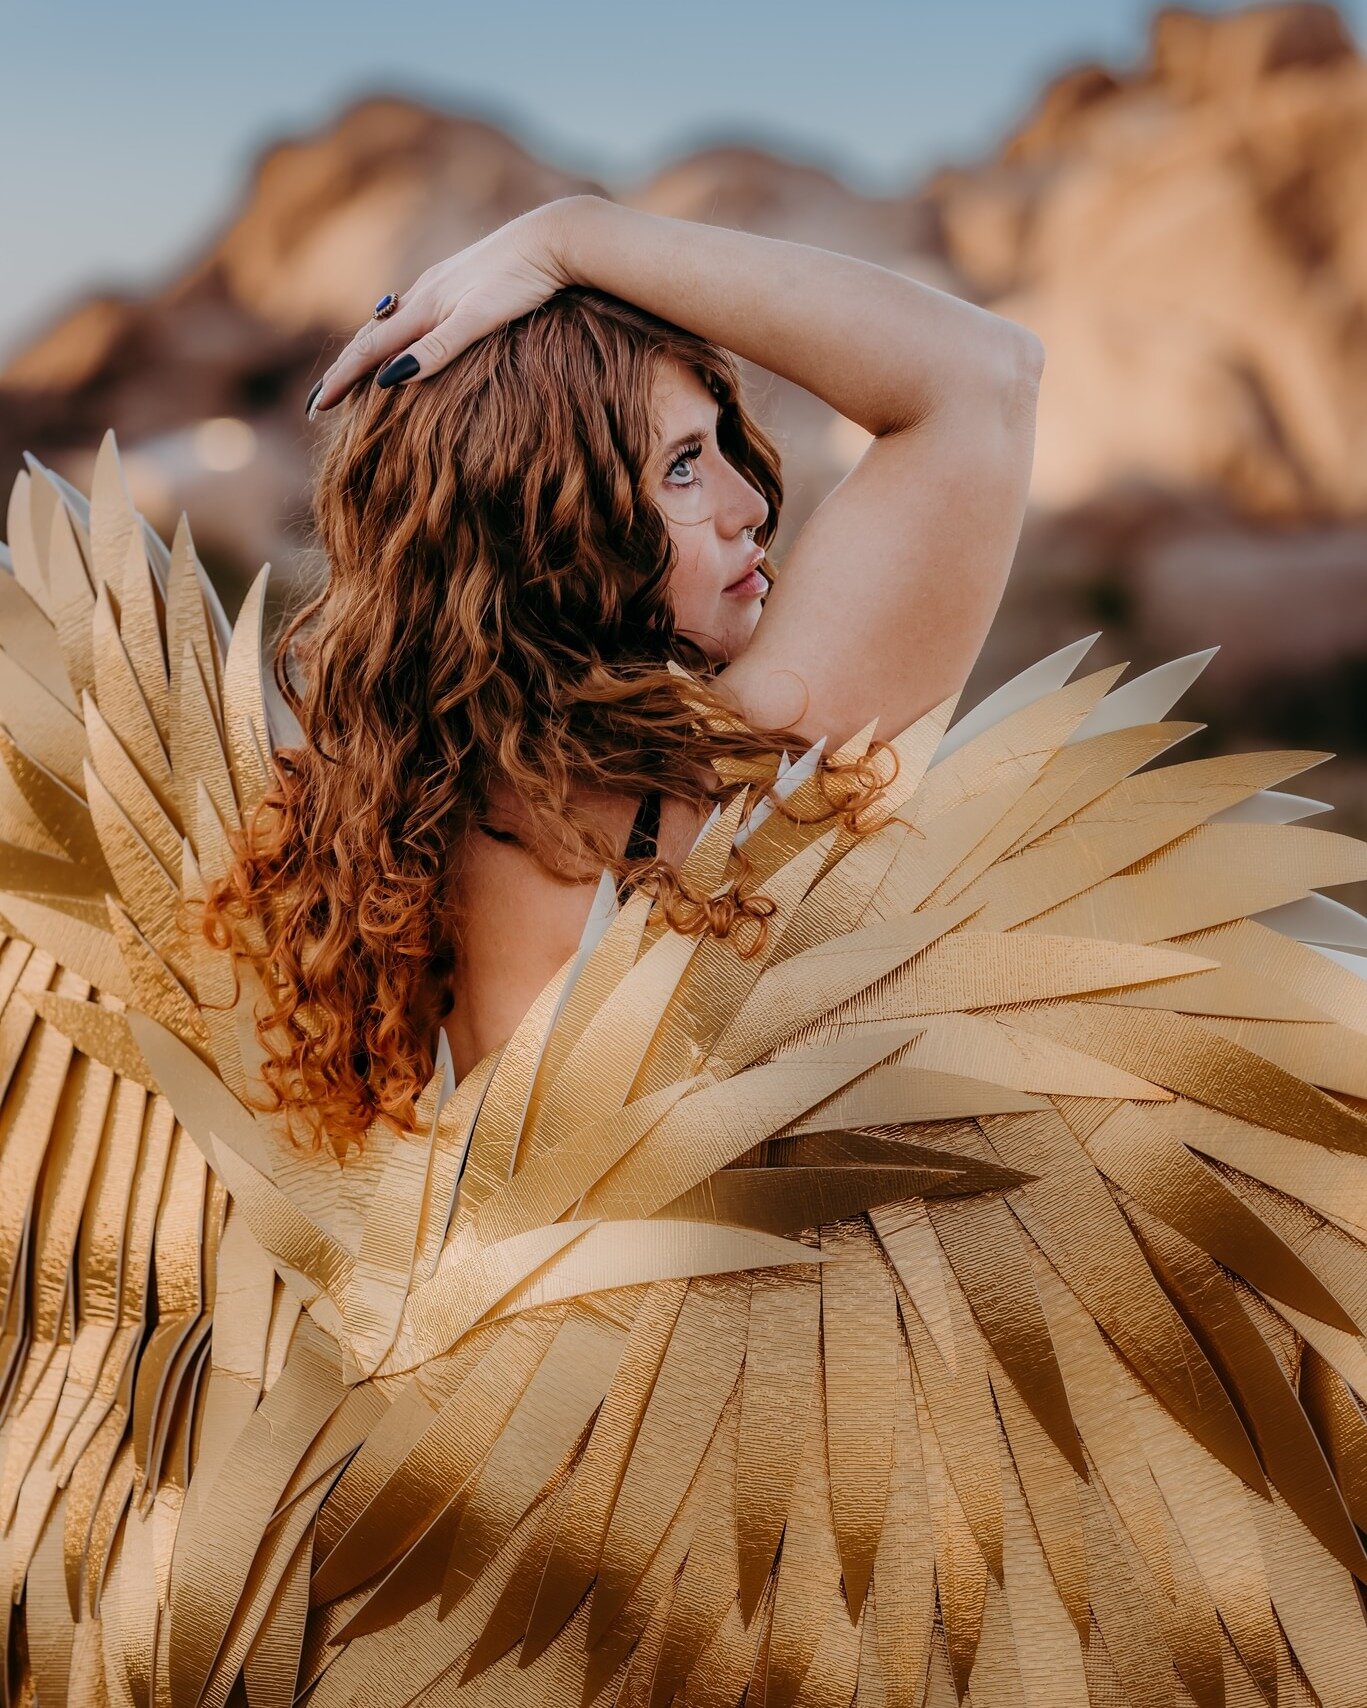 This beautiful, strong, redheaded woman matches the golden wings and is a symbol of freedom, beauty, and spiritual enlightenment, and her images inspire feelings of awe, wonder, and reverence when I look at her.

Let's leave her some love. And while 